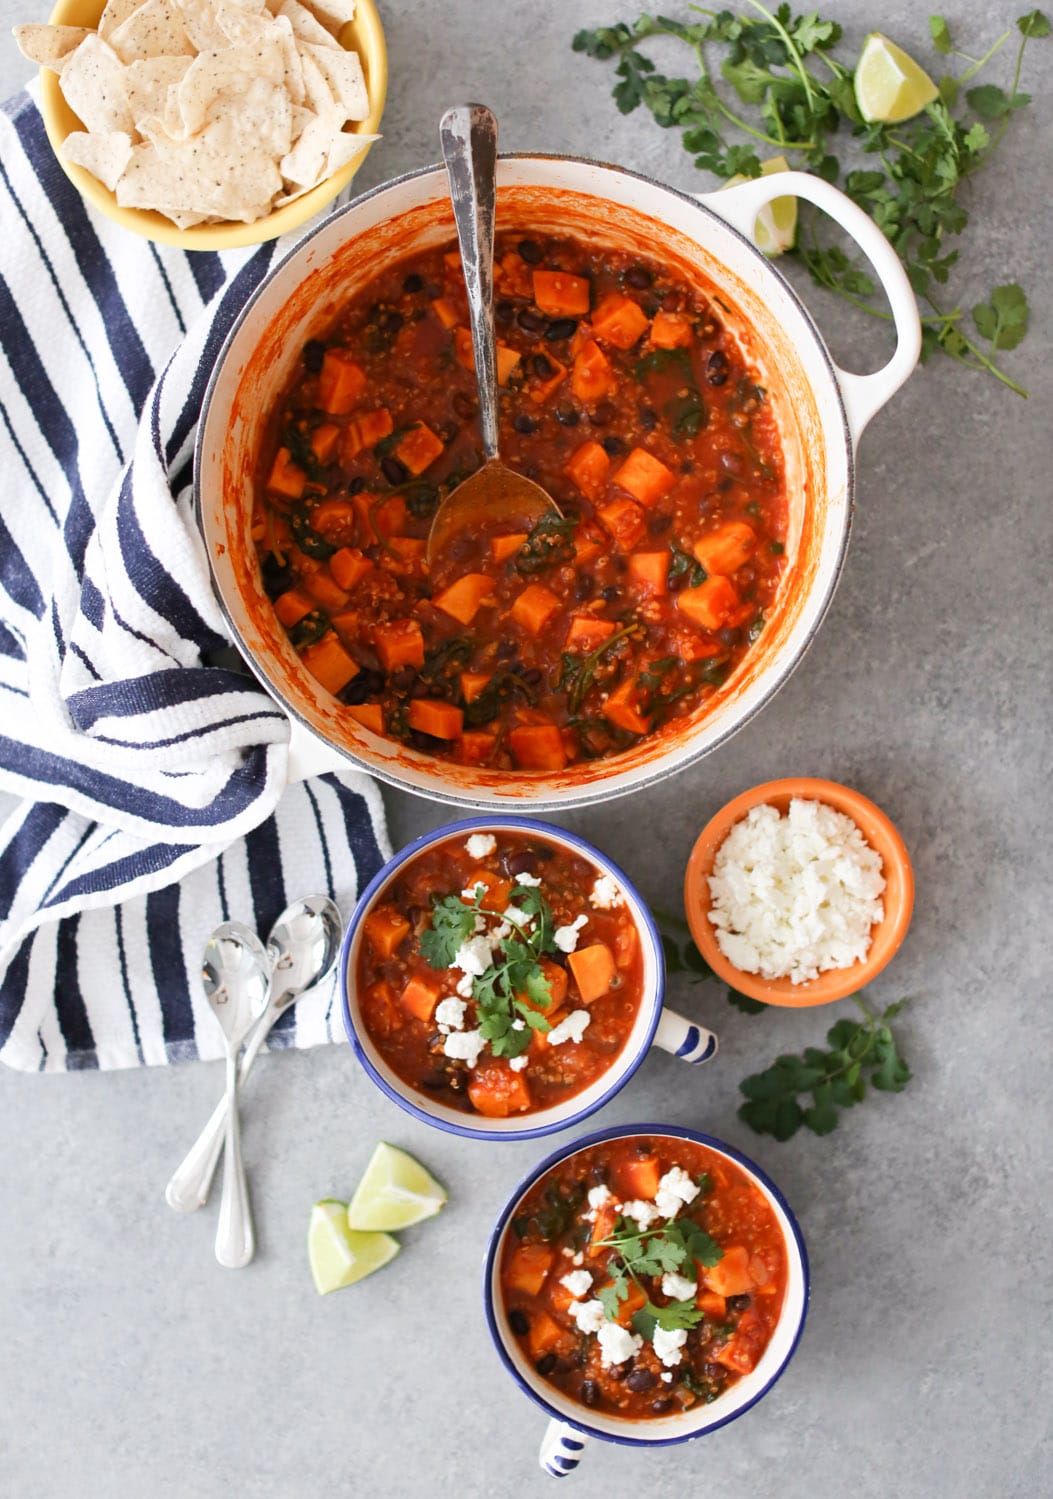 Healthy Pantry Recipes- Mexican Sweet Potato and Black Bean Stew